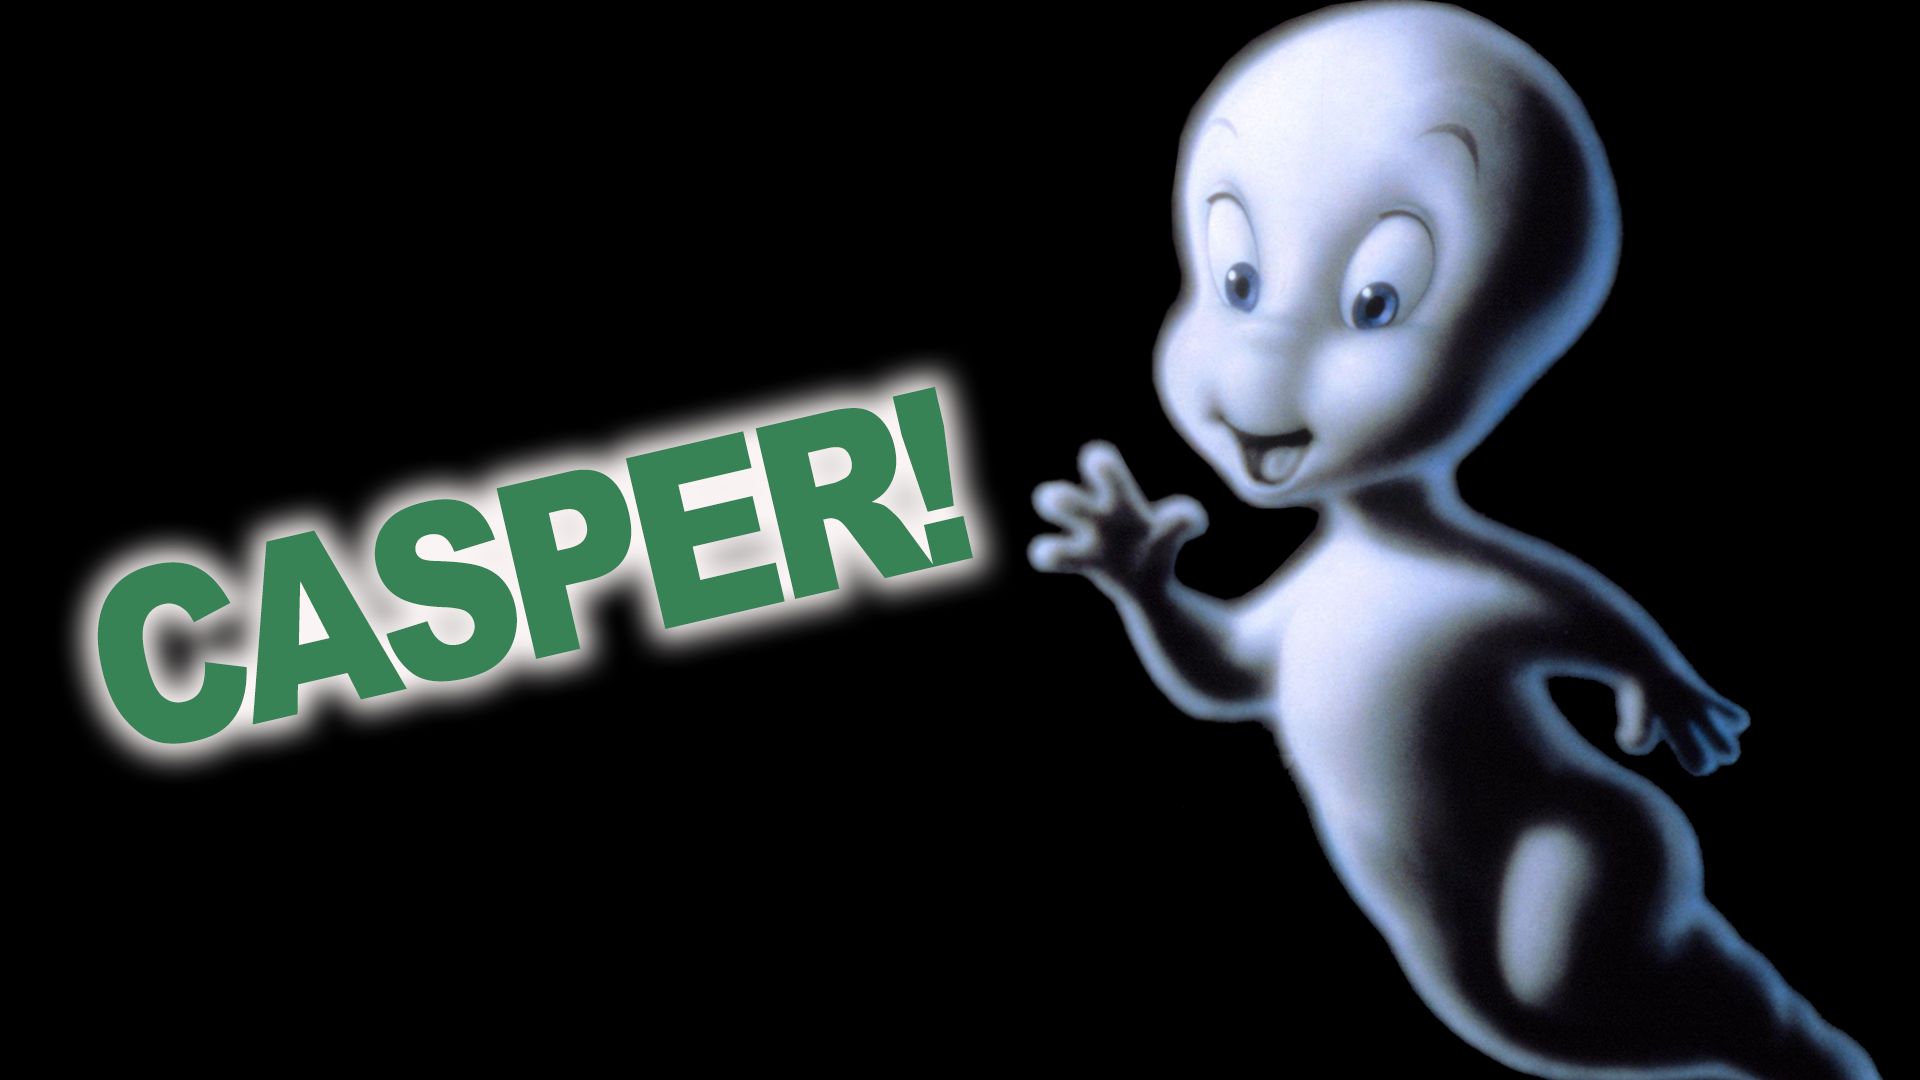 1920x1200 / 1920x1200 casper background hd - Coolwallpapers.me!